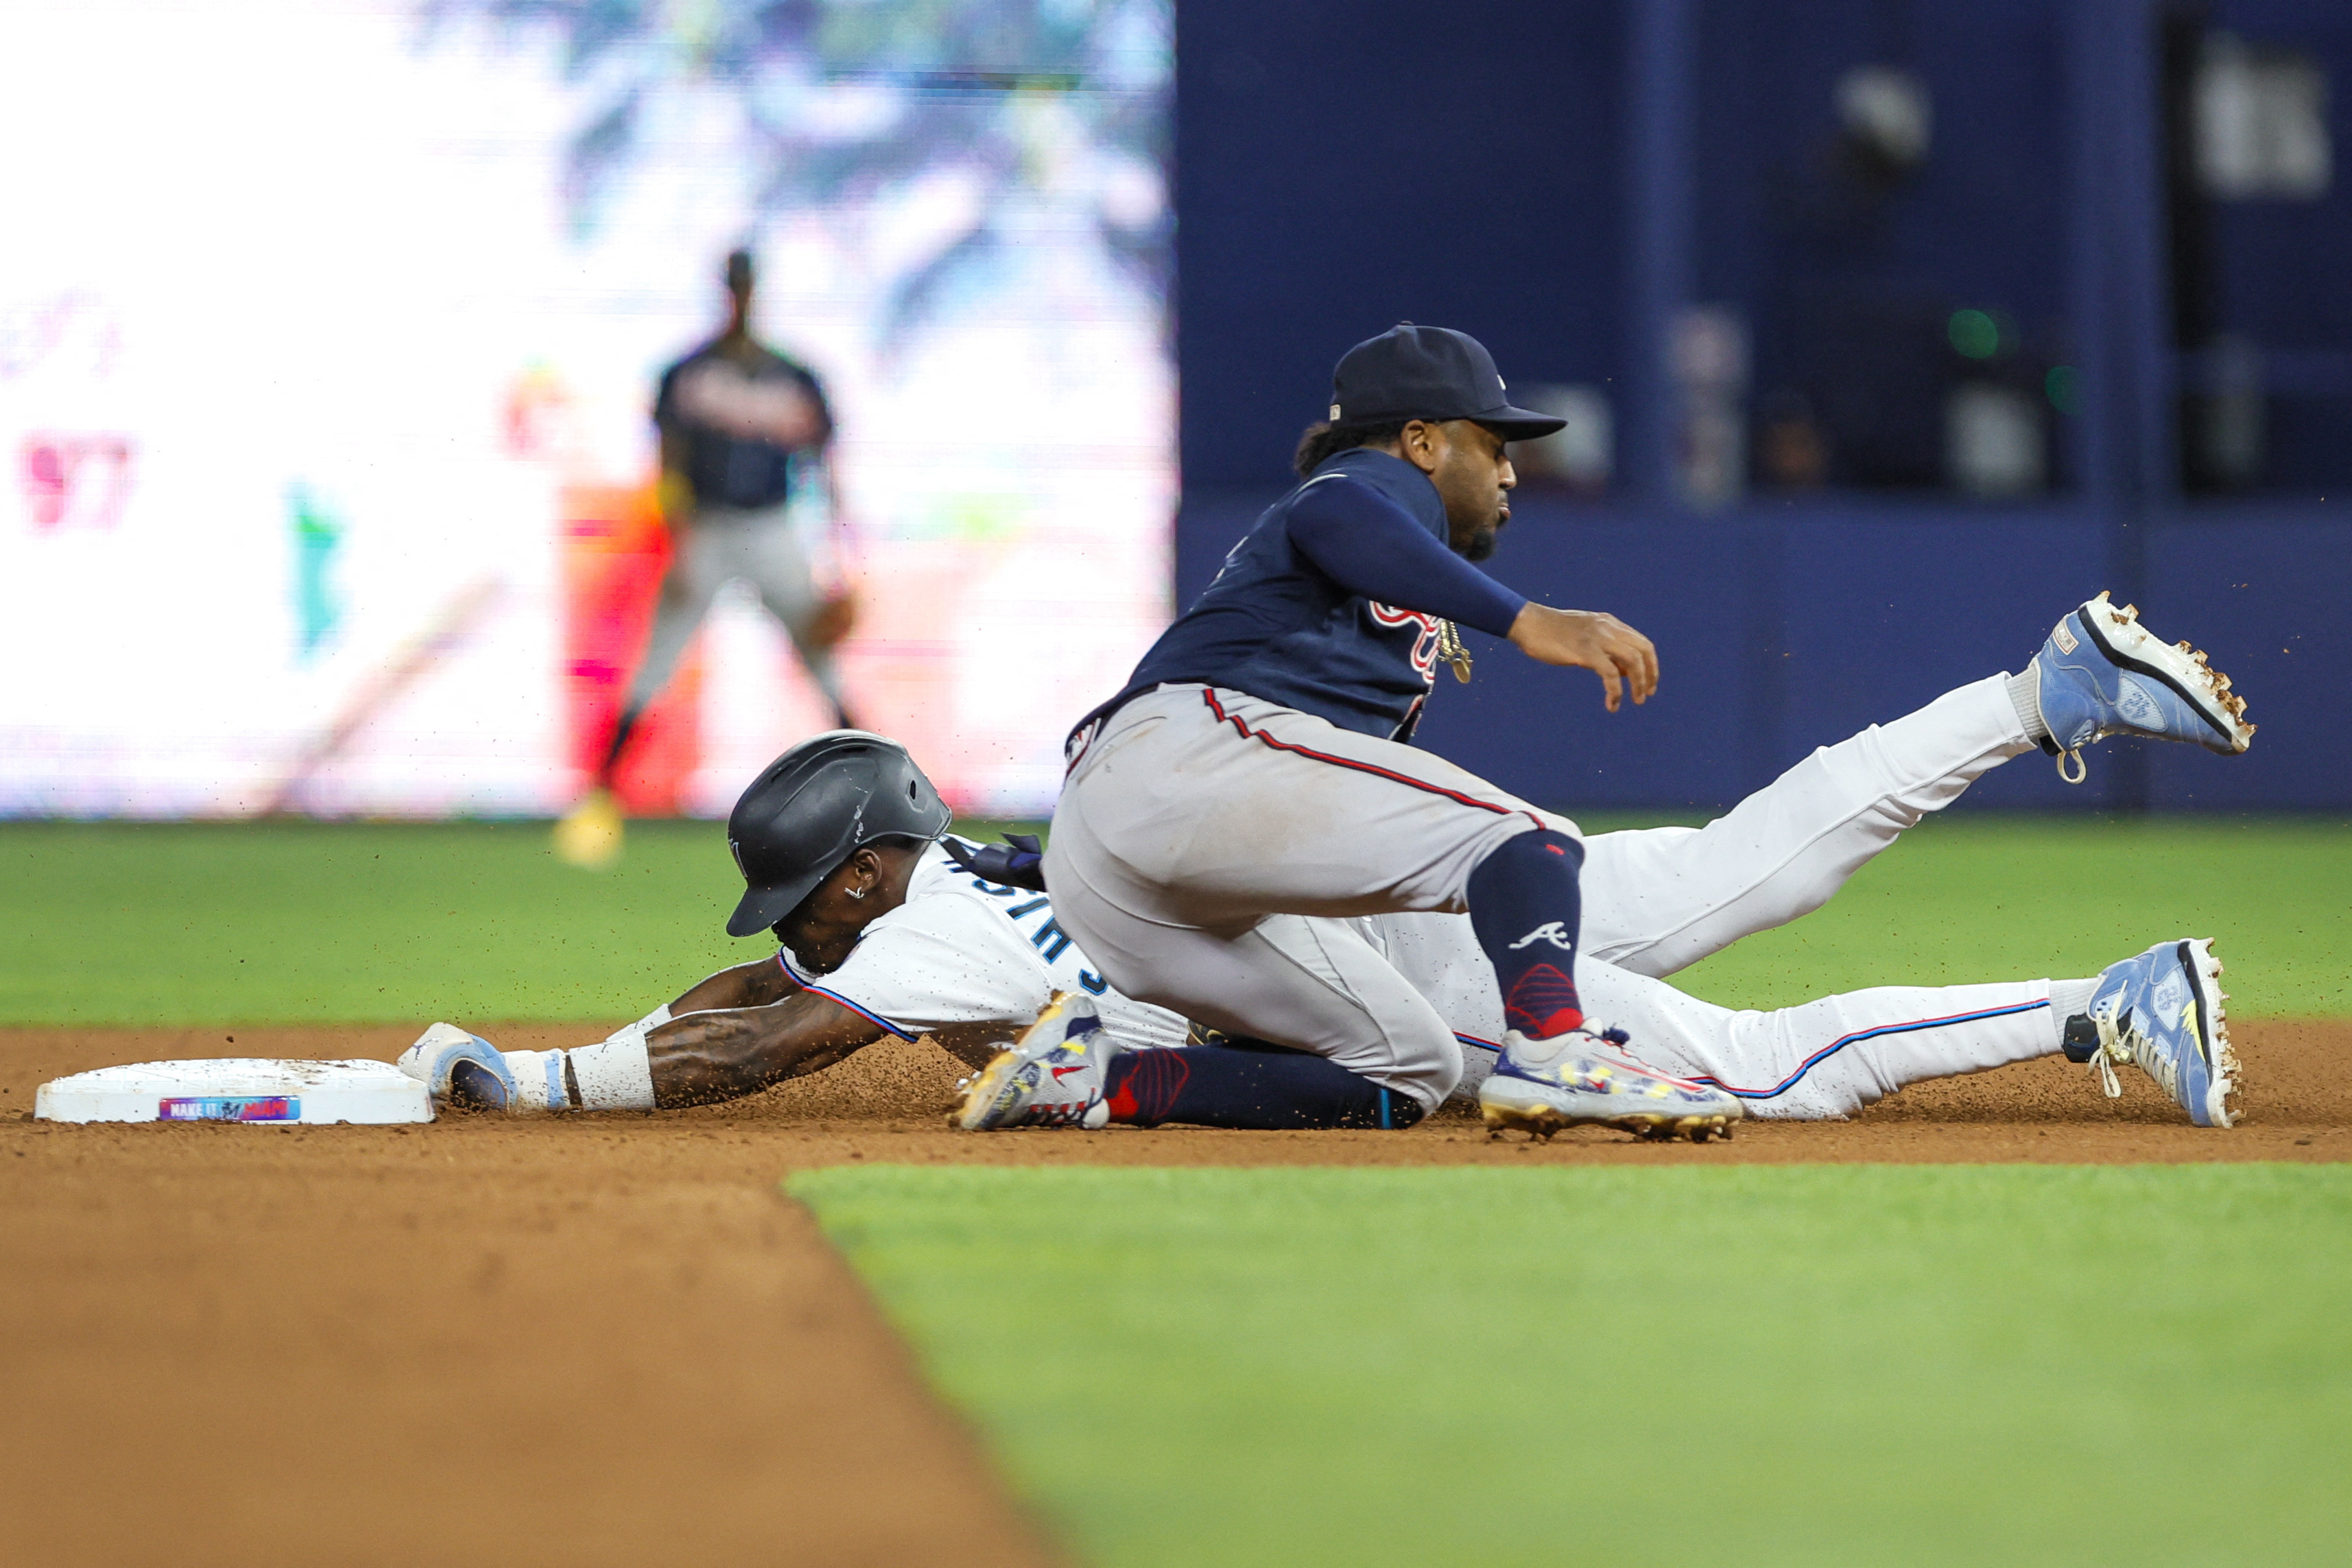 Marcell Ozuna powers Braves past Marlins